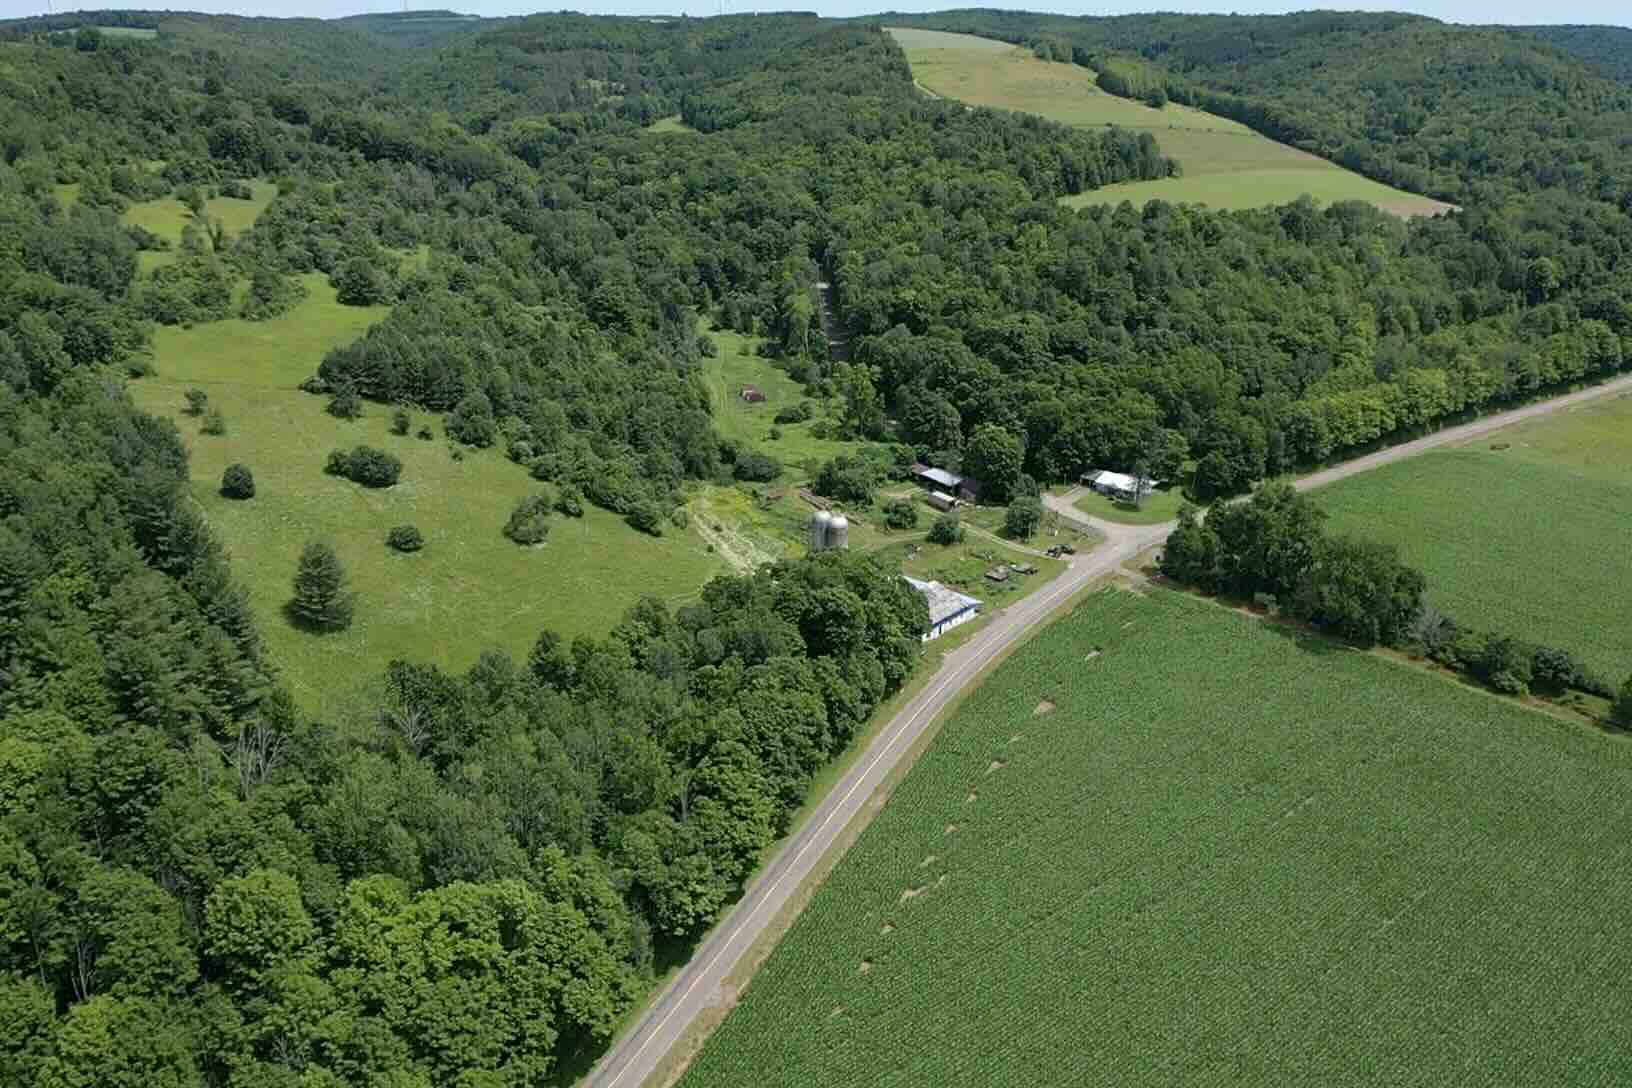 174 acre Farm and Recreational Property in Avoca NY 9916 County Road 9